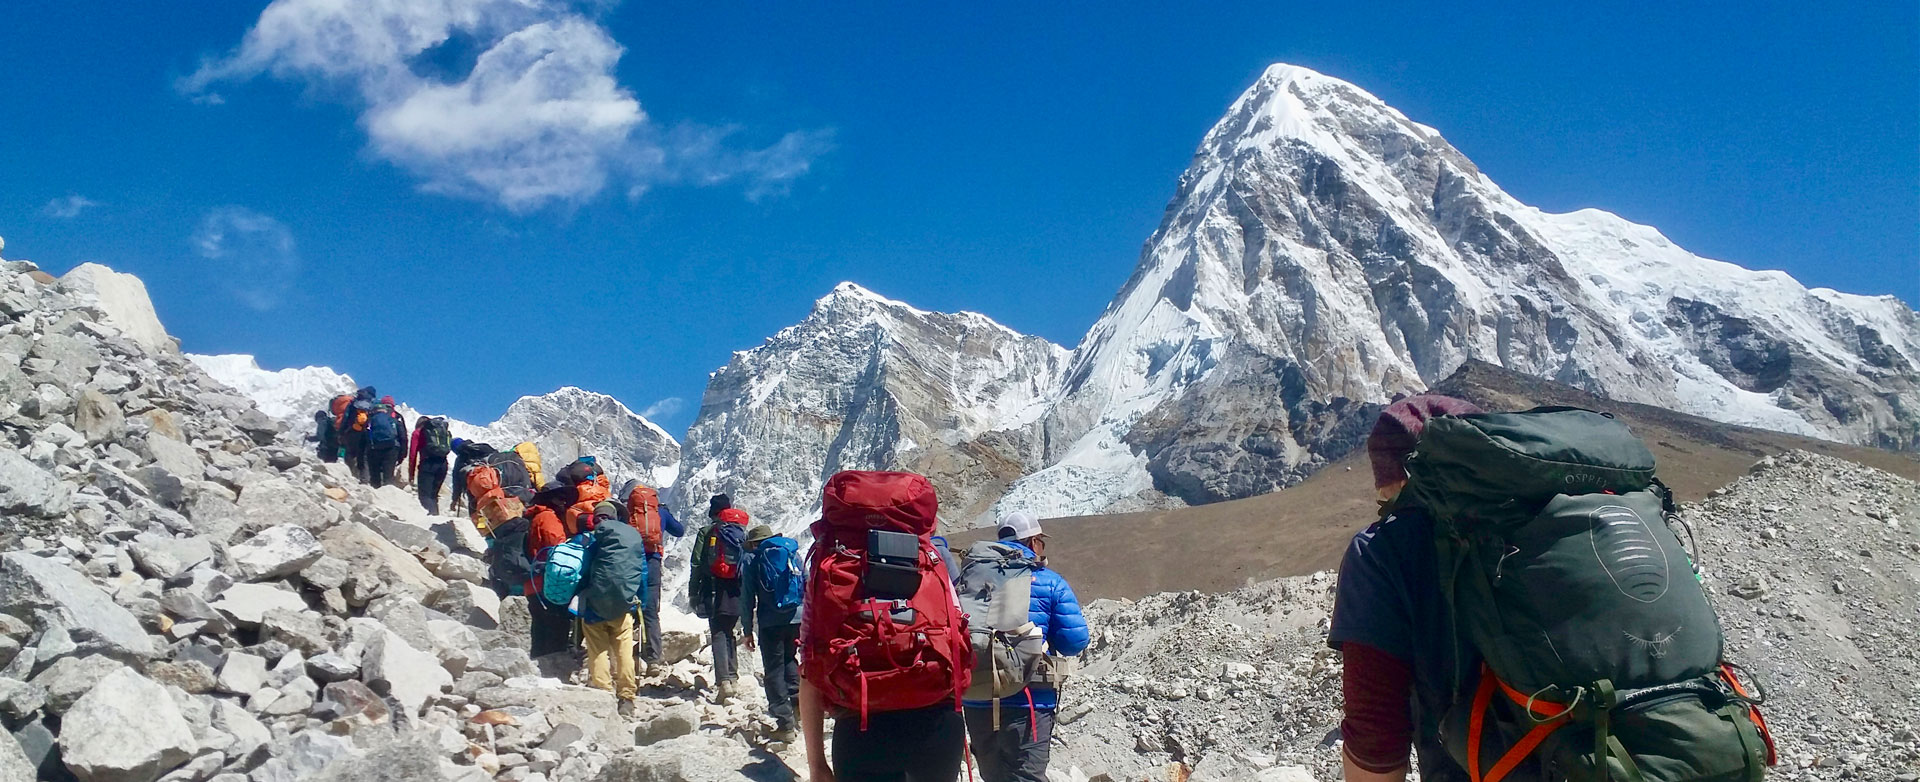 Best time to hike Everest base camp